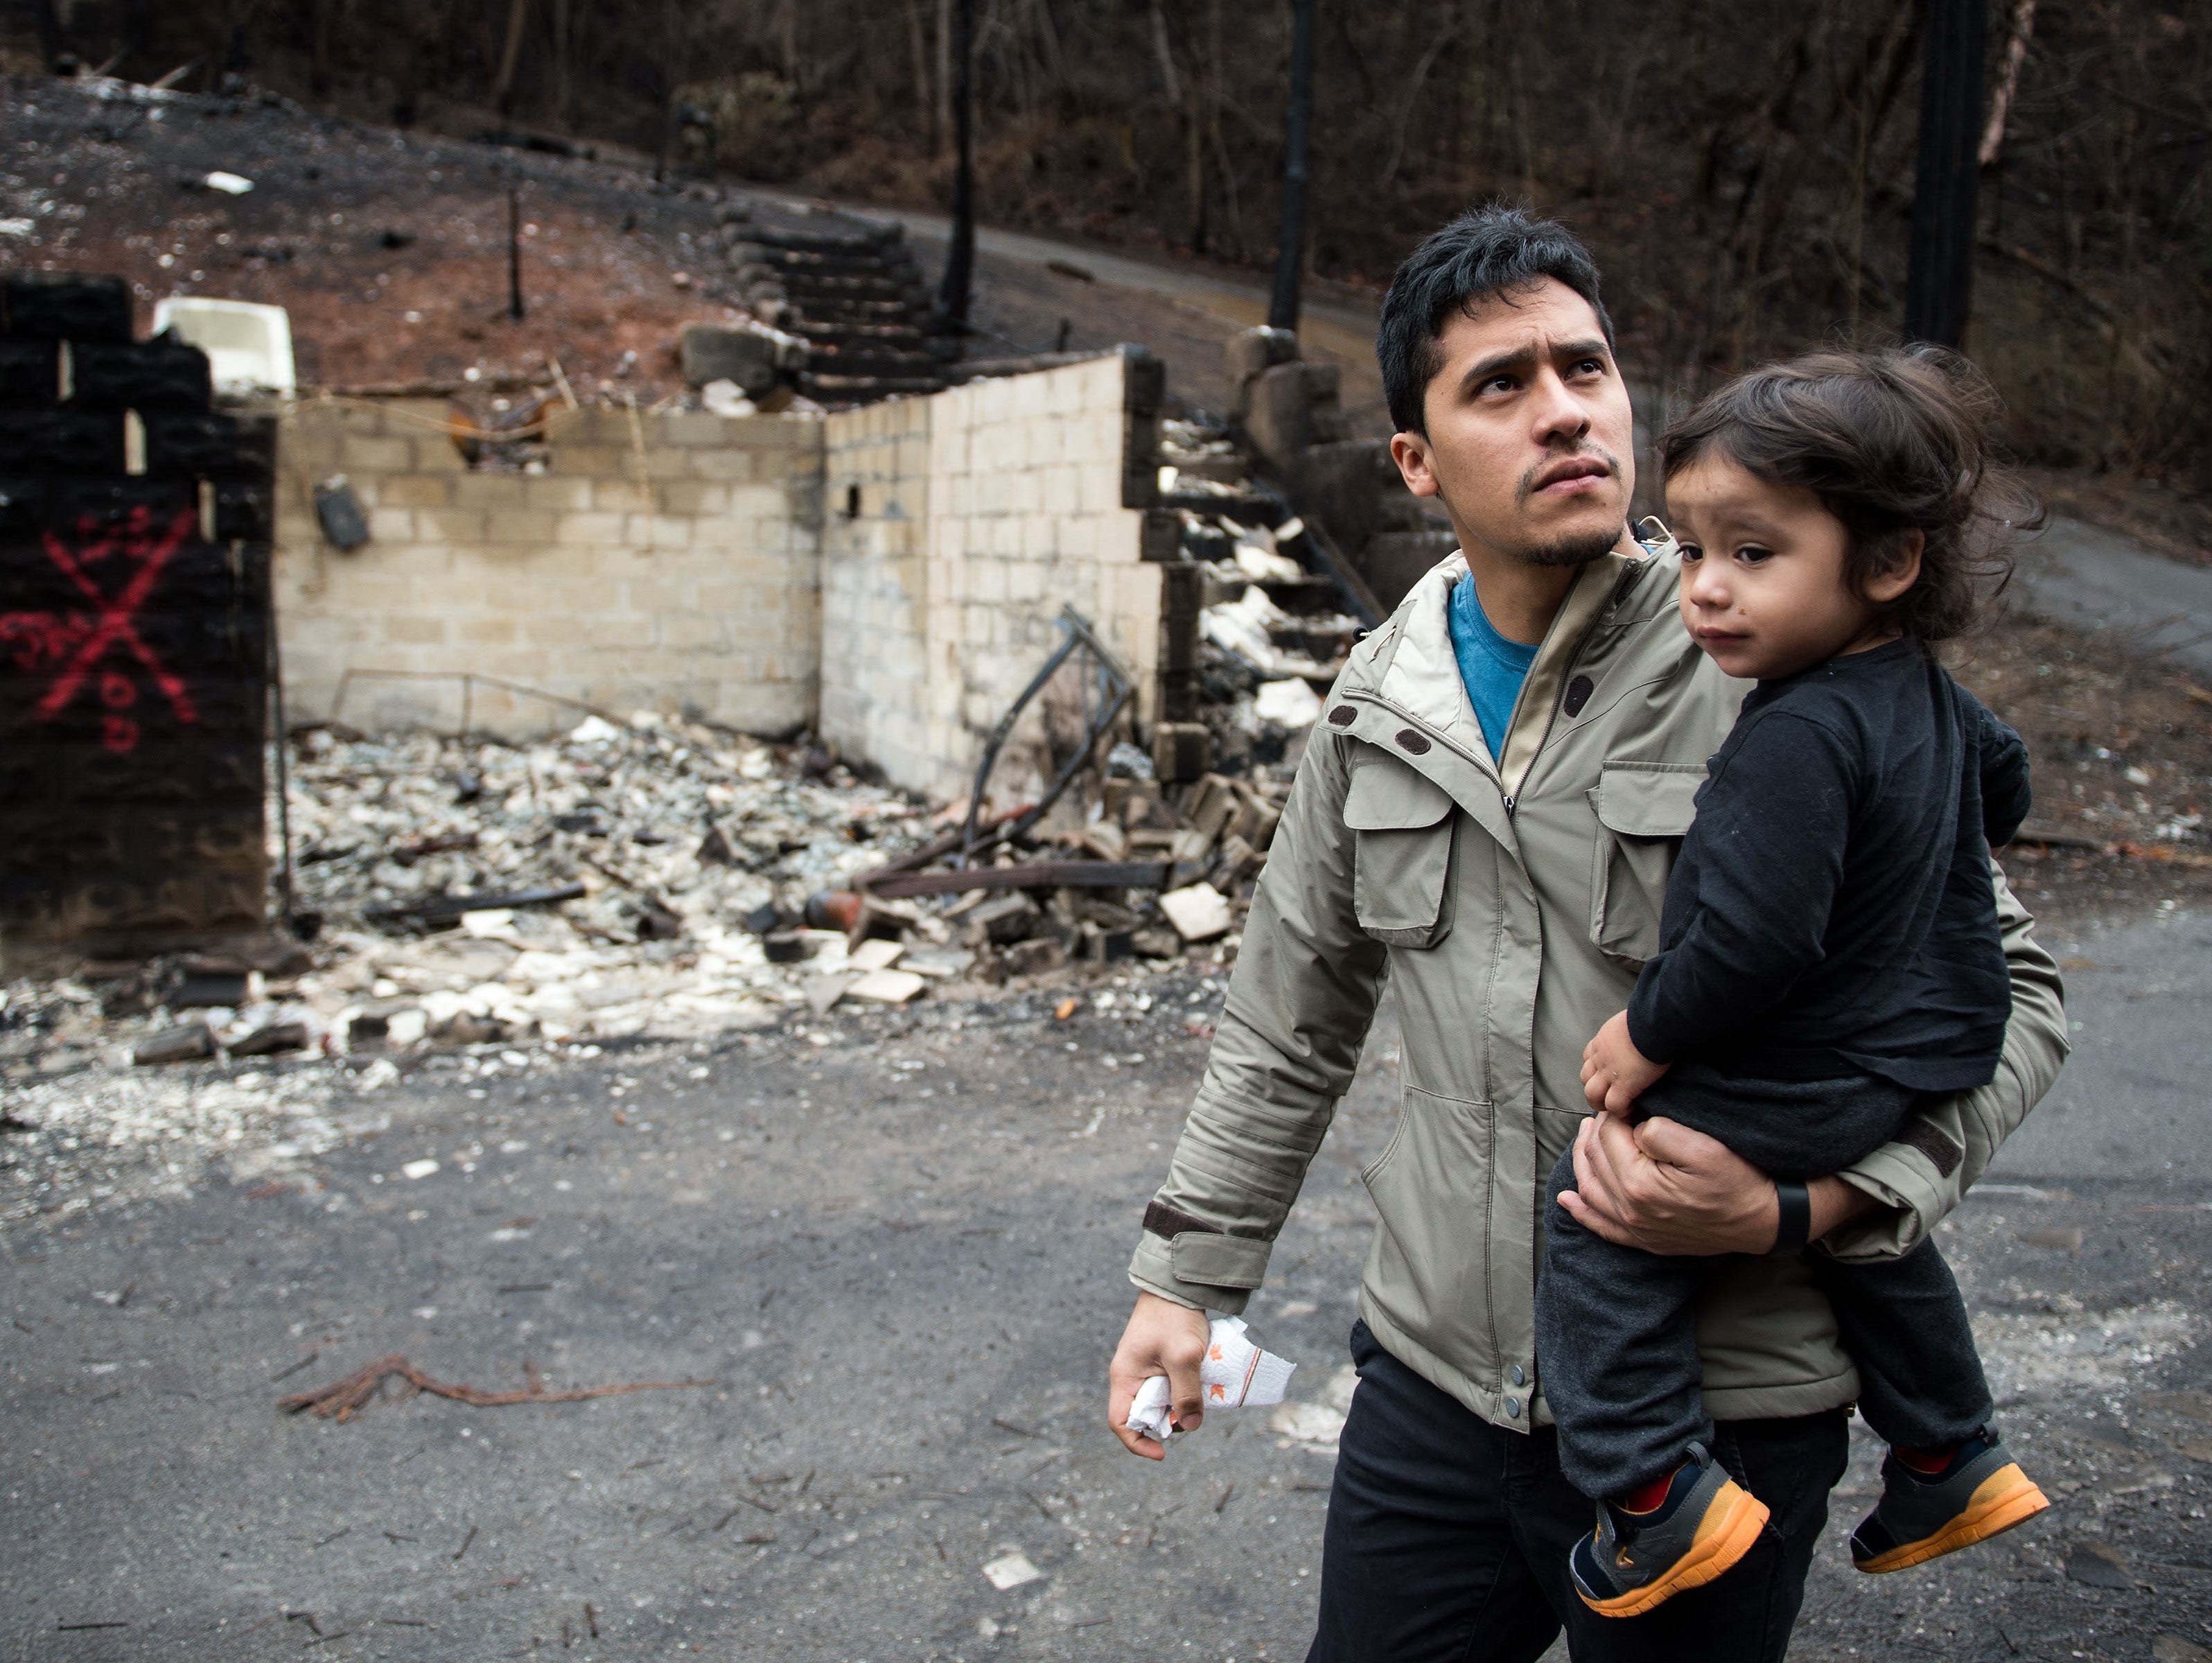 Allan Rivera holds onto his son Nathan Rivera, 23 months old, as he looks at the remains of their home for the first time. The family evacuated from their rental cabin before it was completely destroyed.